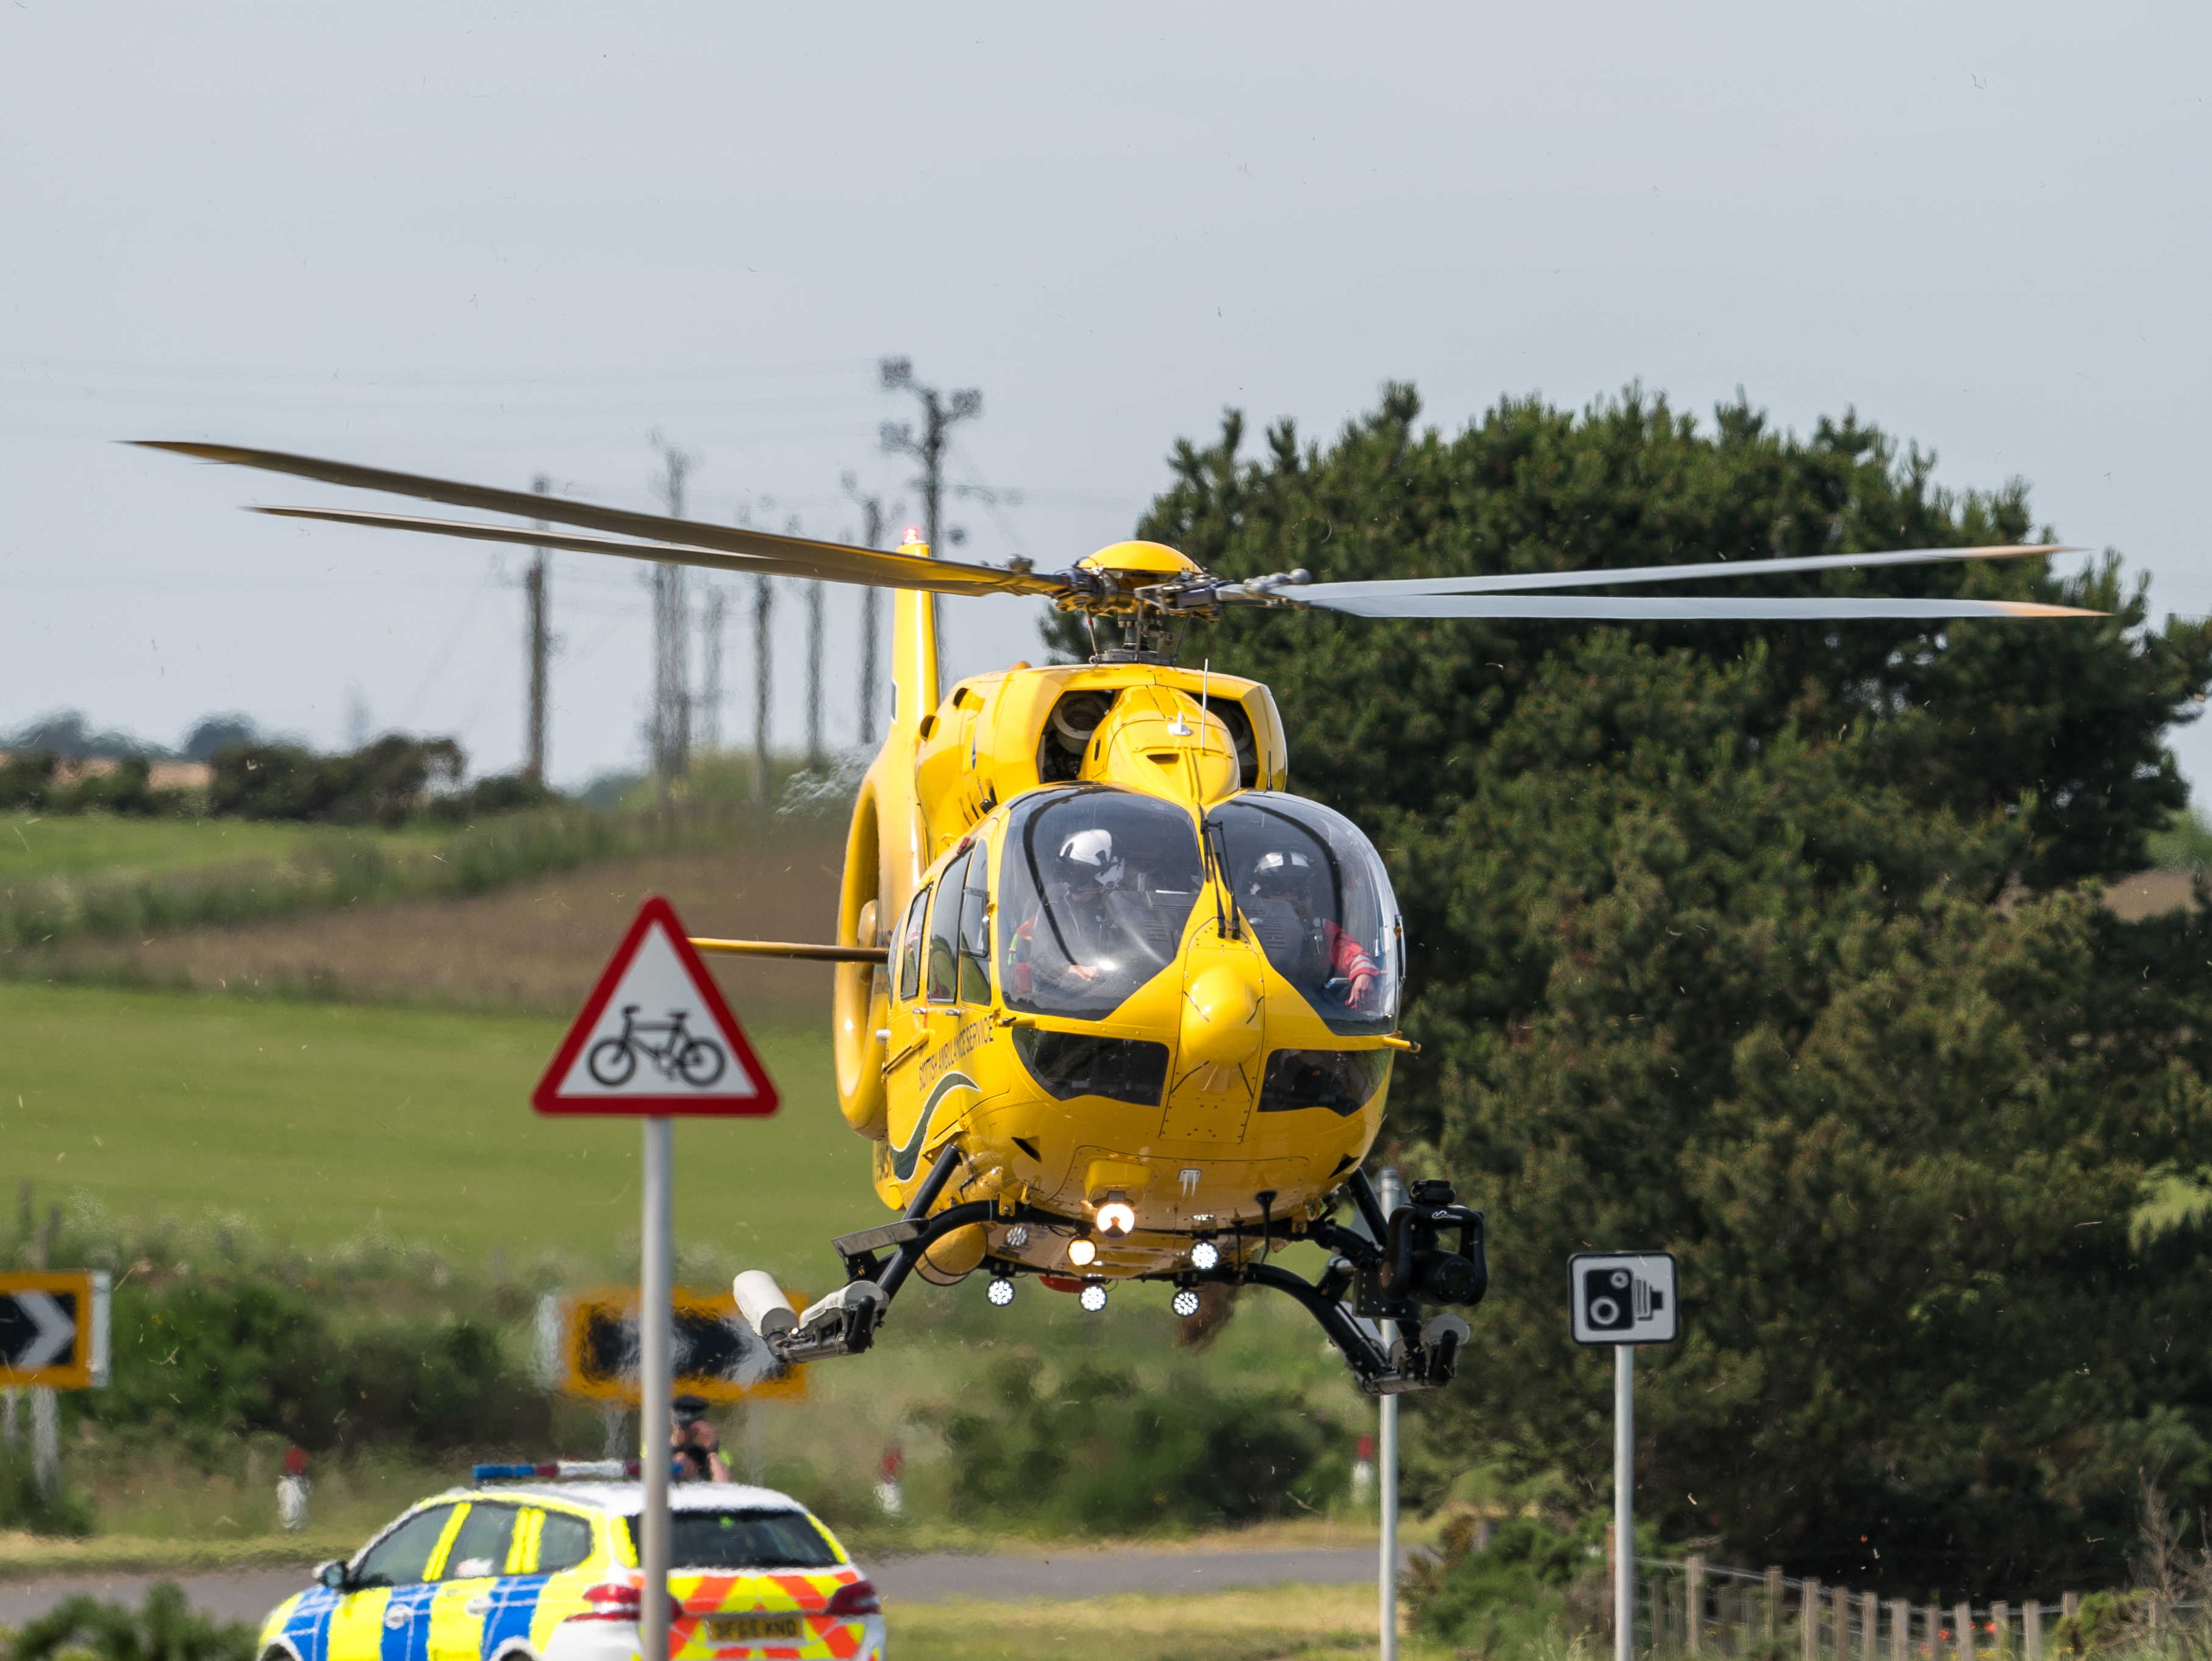 The B9040 was shut for 45 minutes as an air ambulance attended an incident where a cyclist took unwell.